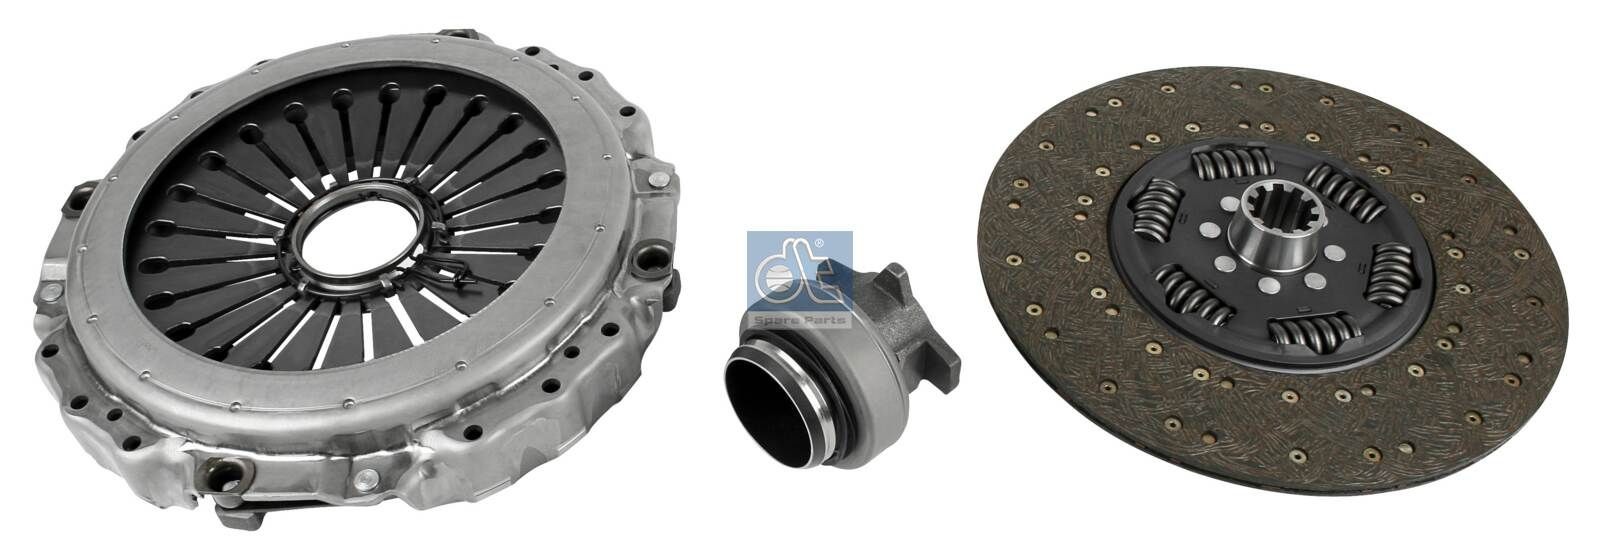 DT Spare Parts 430mm Ø: 430mm Clutch replacement kit 5.95019 buy